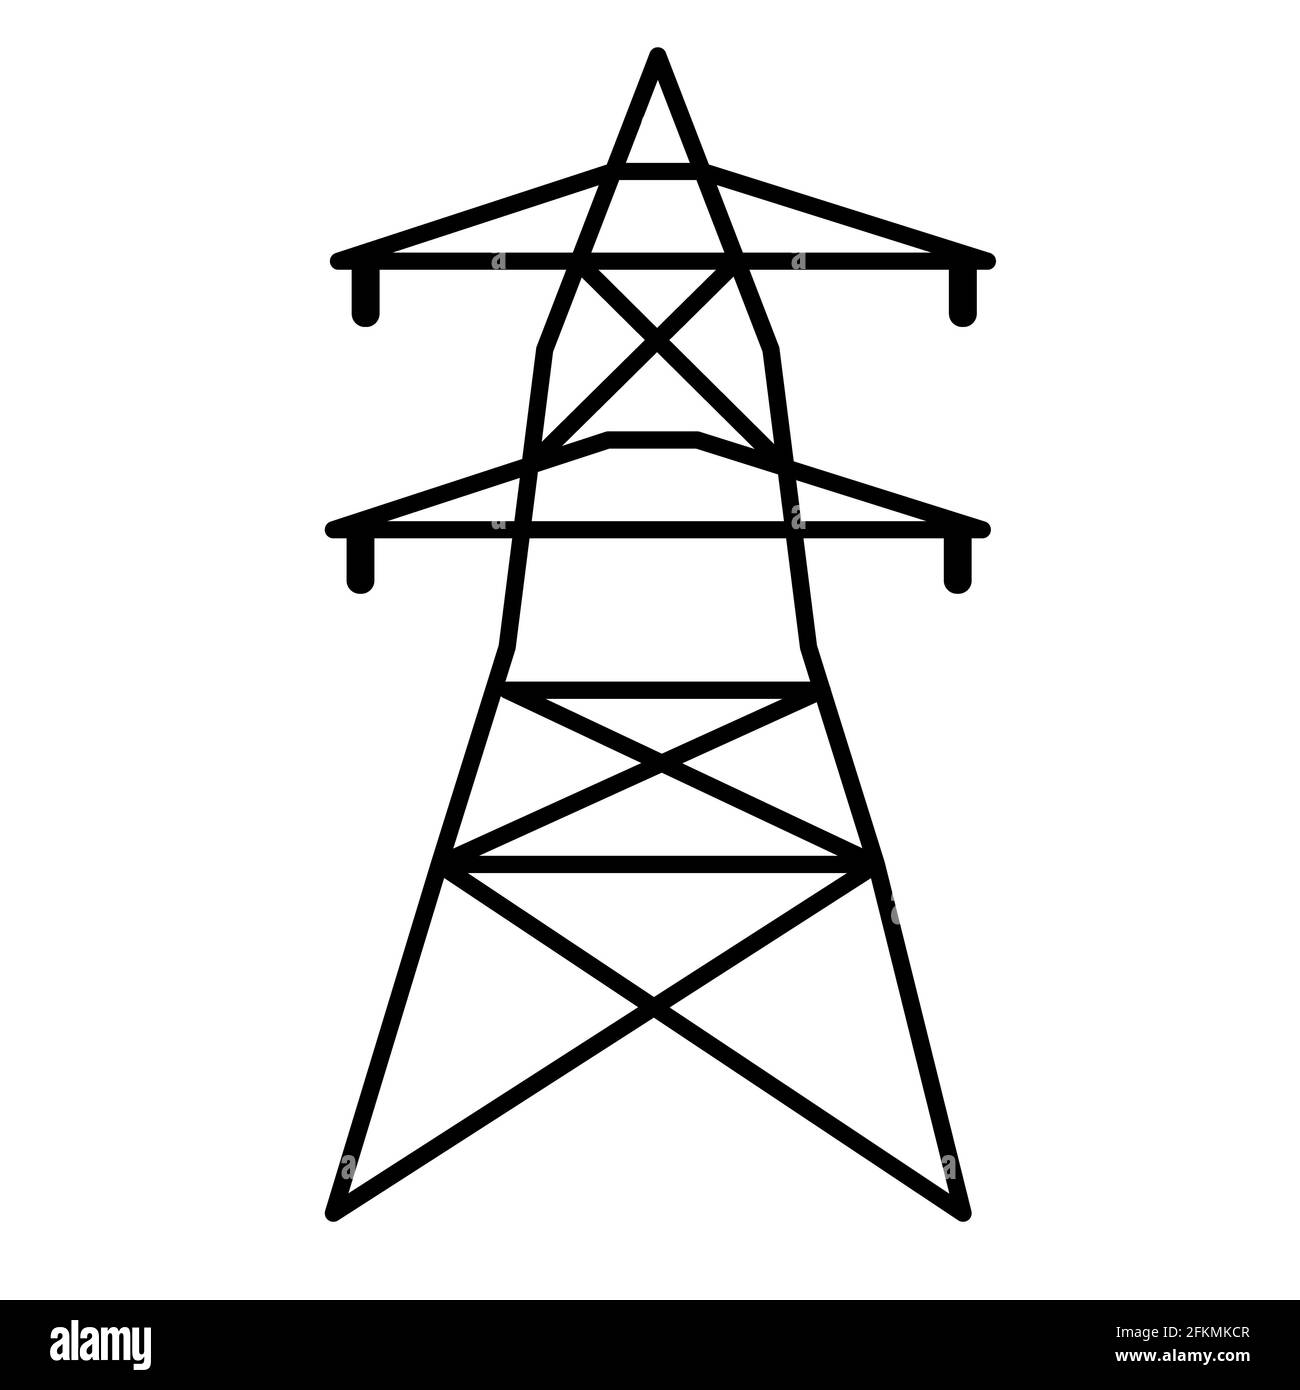 electrical tower icon on white background. flat style. electricity sign. high voltage electric transmission tower. electric power logo. Stock Photo